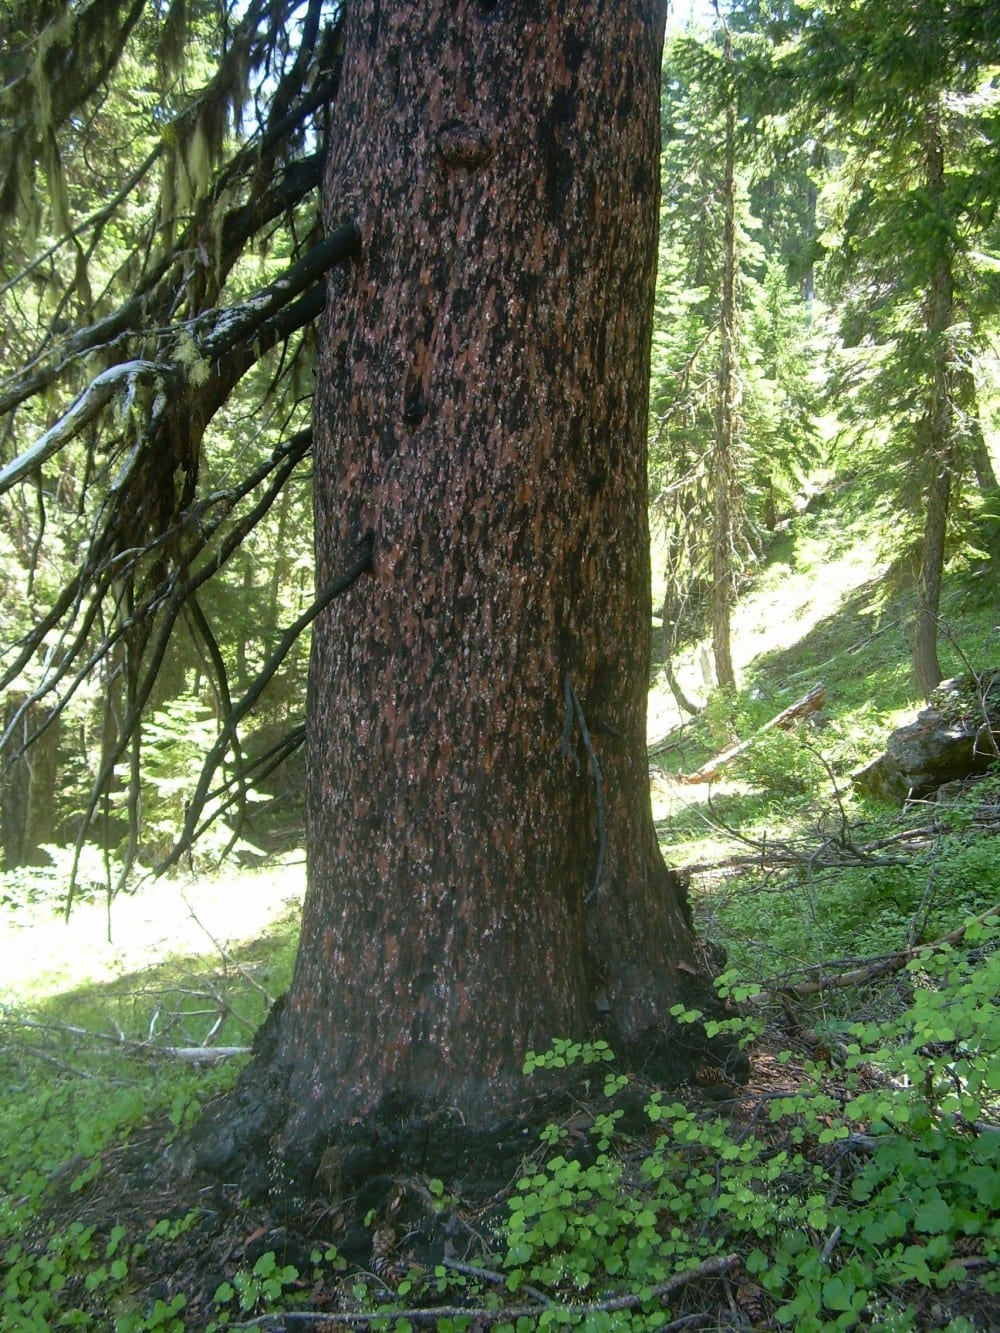 Shown is one of the largest Baker cypress (Cupressus bakeri) trees in the world. This grove of large trees is located at Miller Lake in the Siskiyou Mountains.